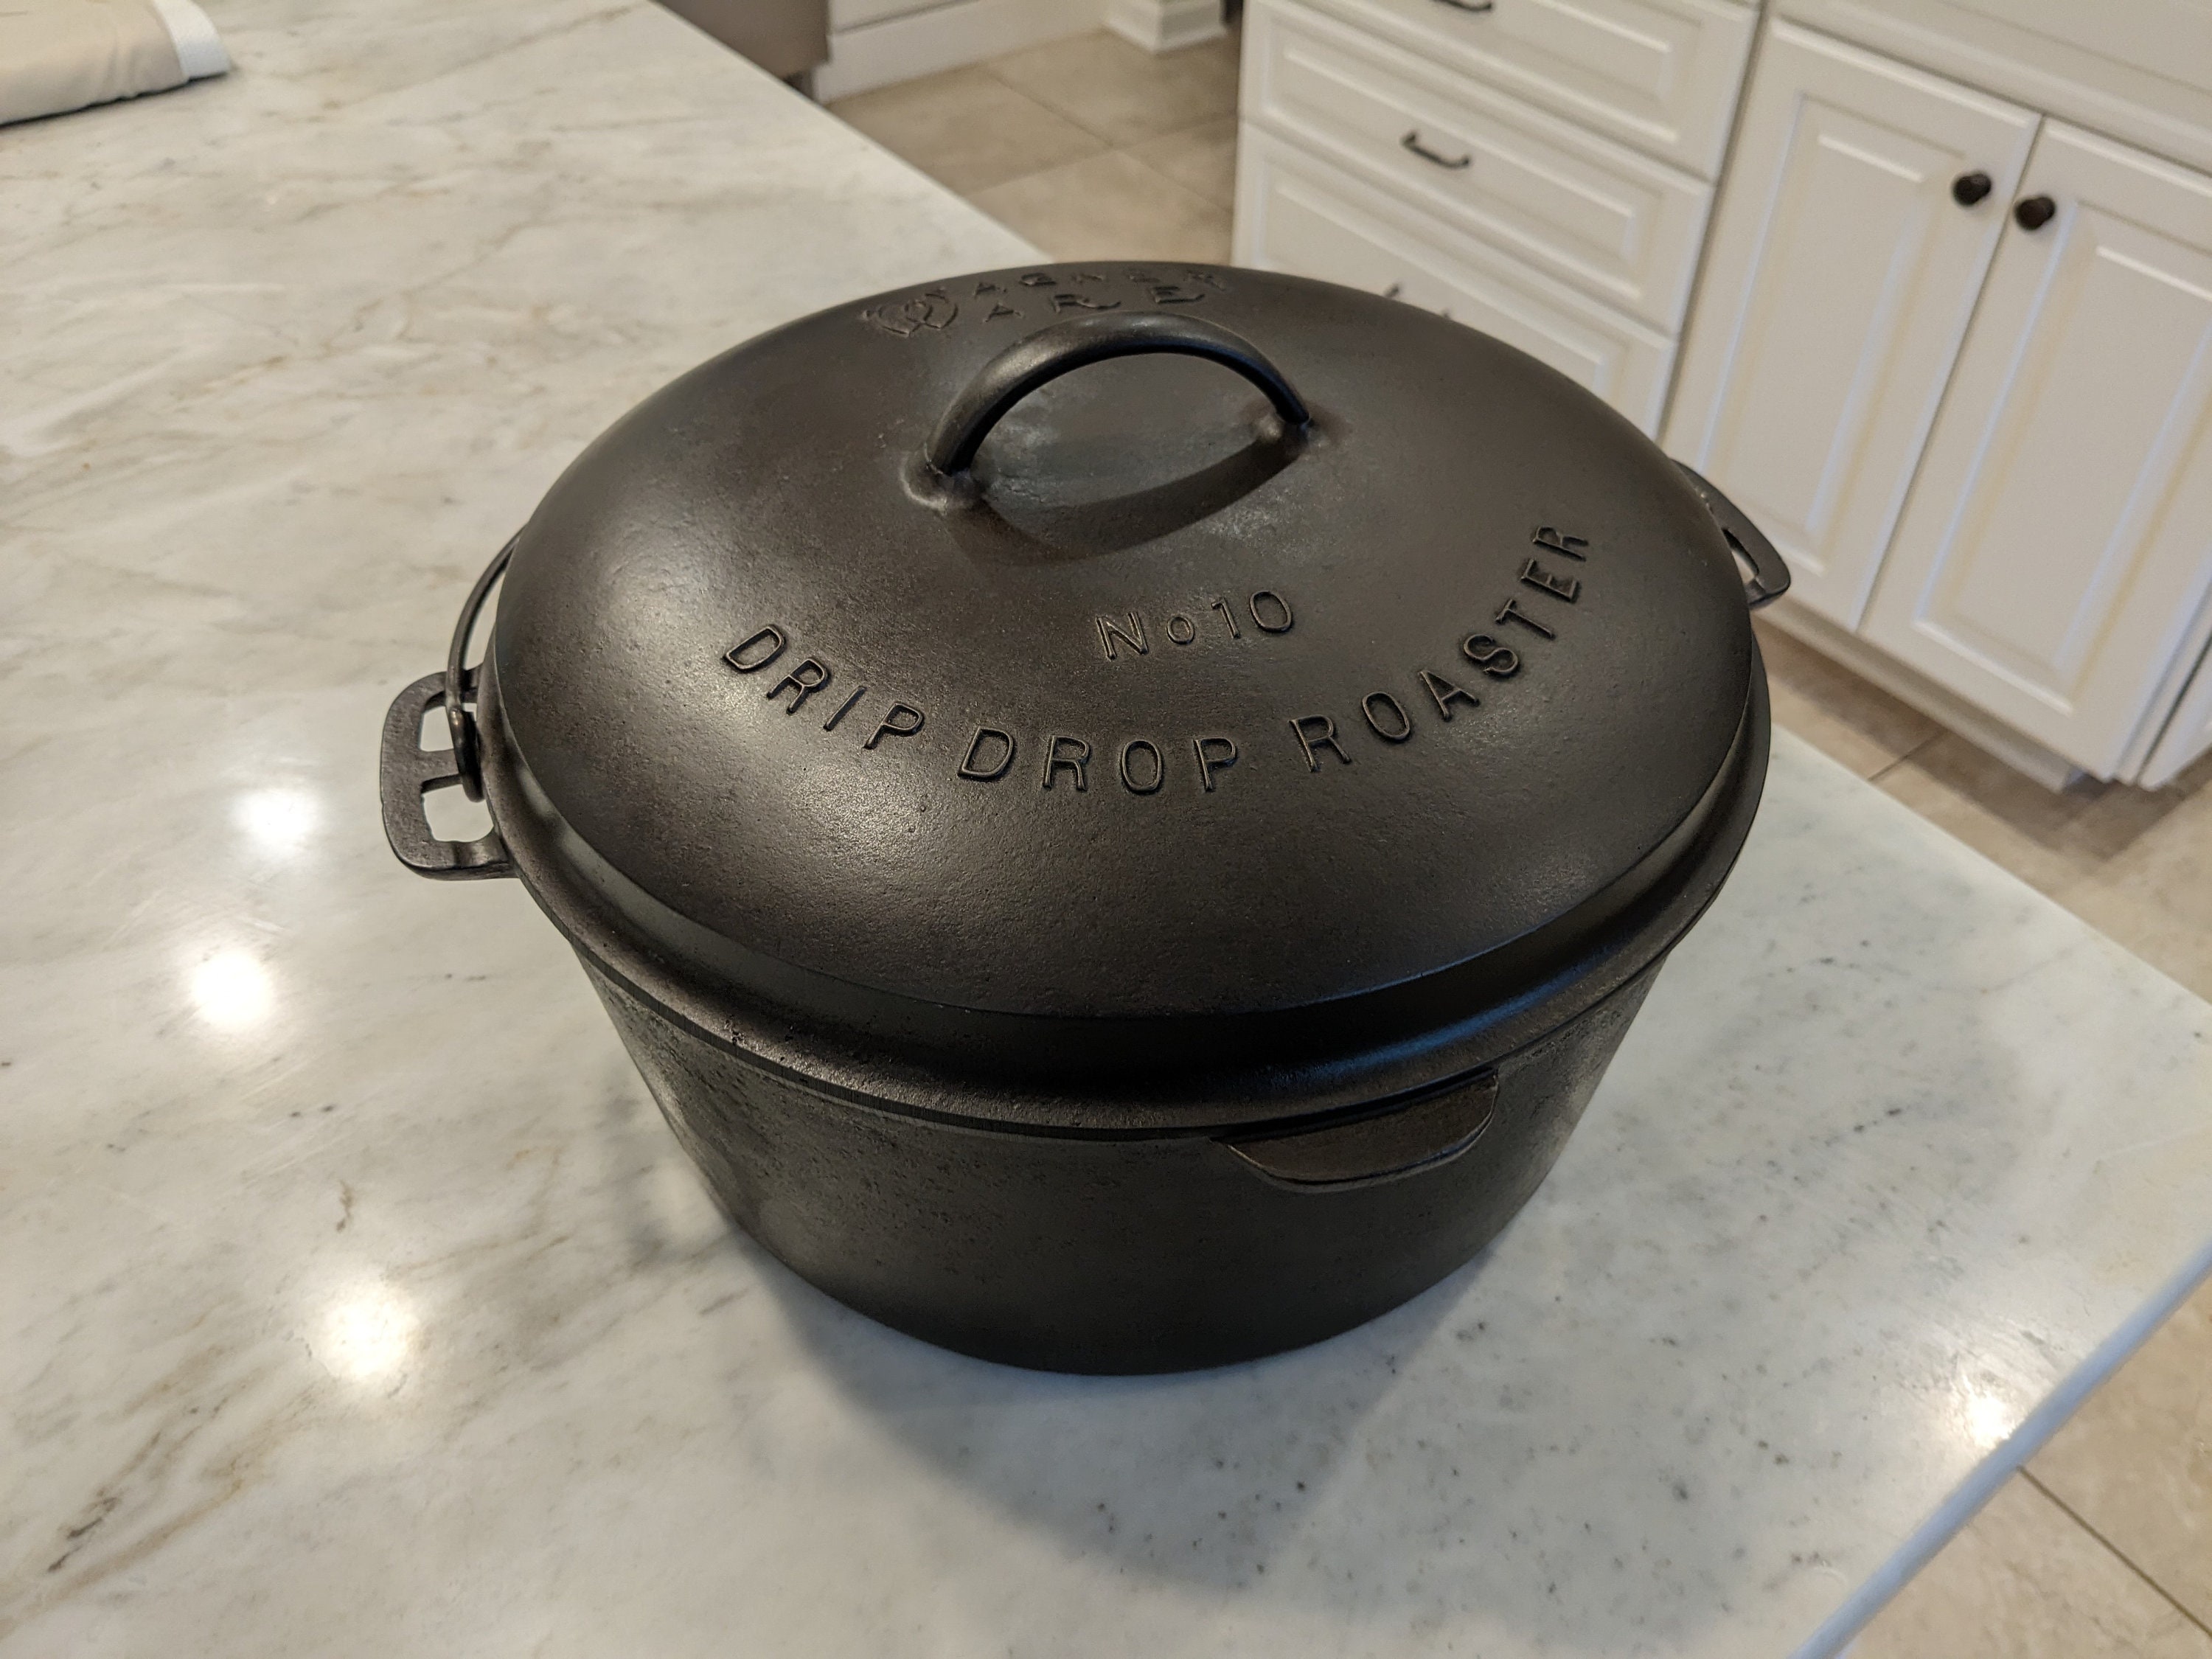 Magnaware Cast Aluminum Dutch Oven - Oval Dutch Oven Pot with Lid for Families and Parties - Lightweight Cajun Cookware with Ideal Heat Distribution